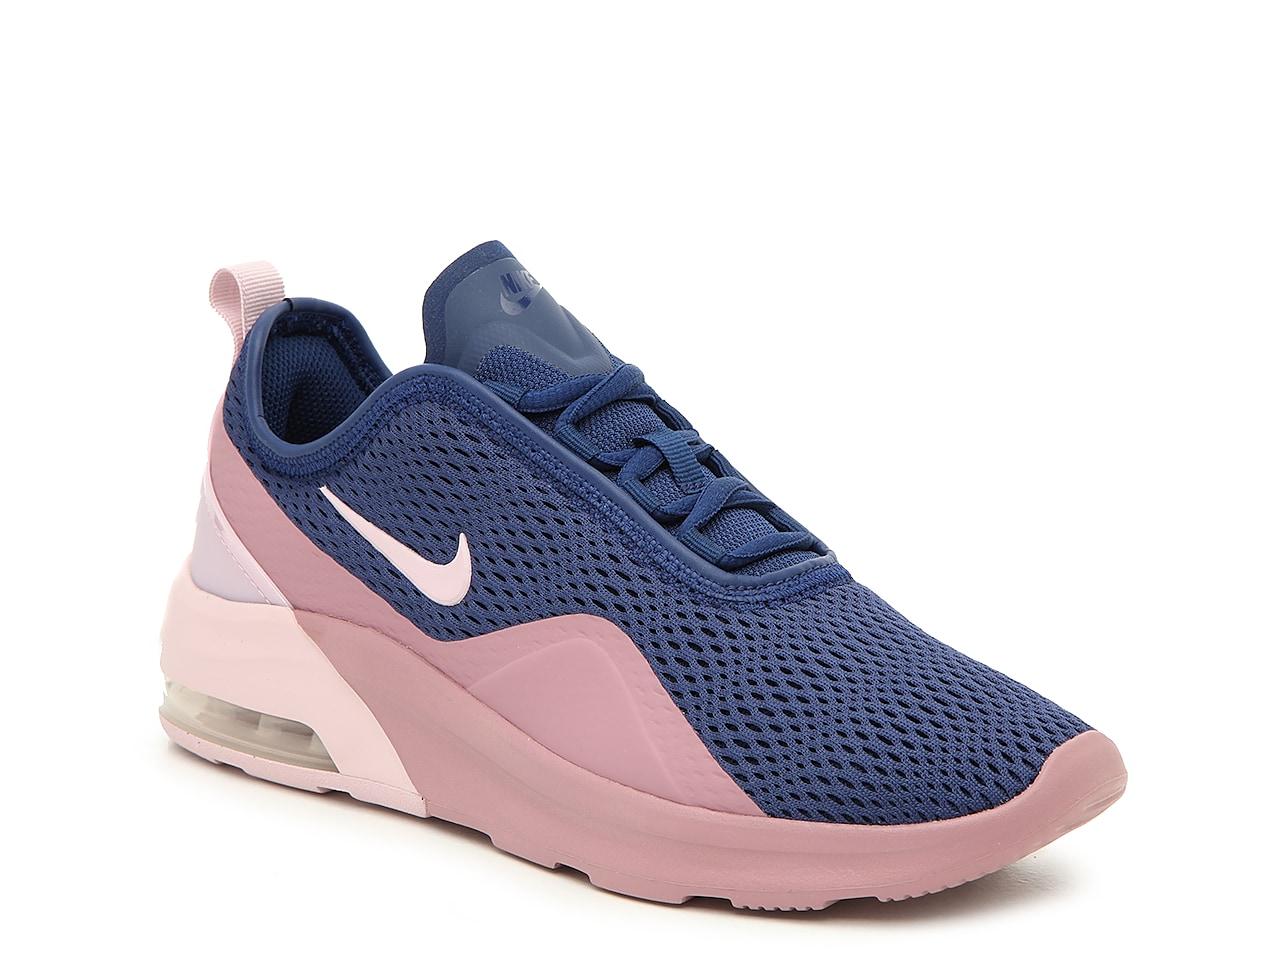 Nike Synthetic Air Max Motion 2 Sneaker in Navy/Mauve (Blue) | Lyst